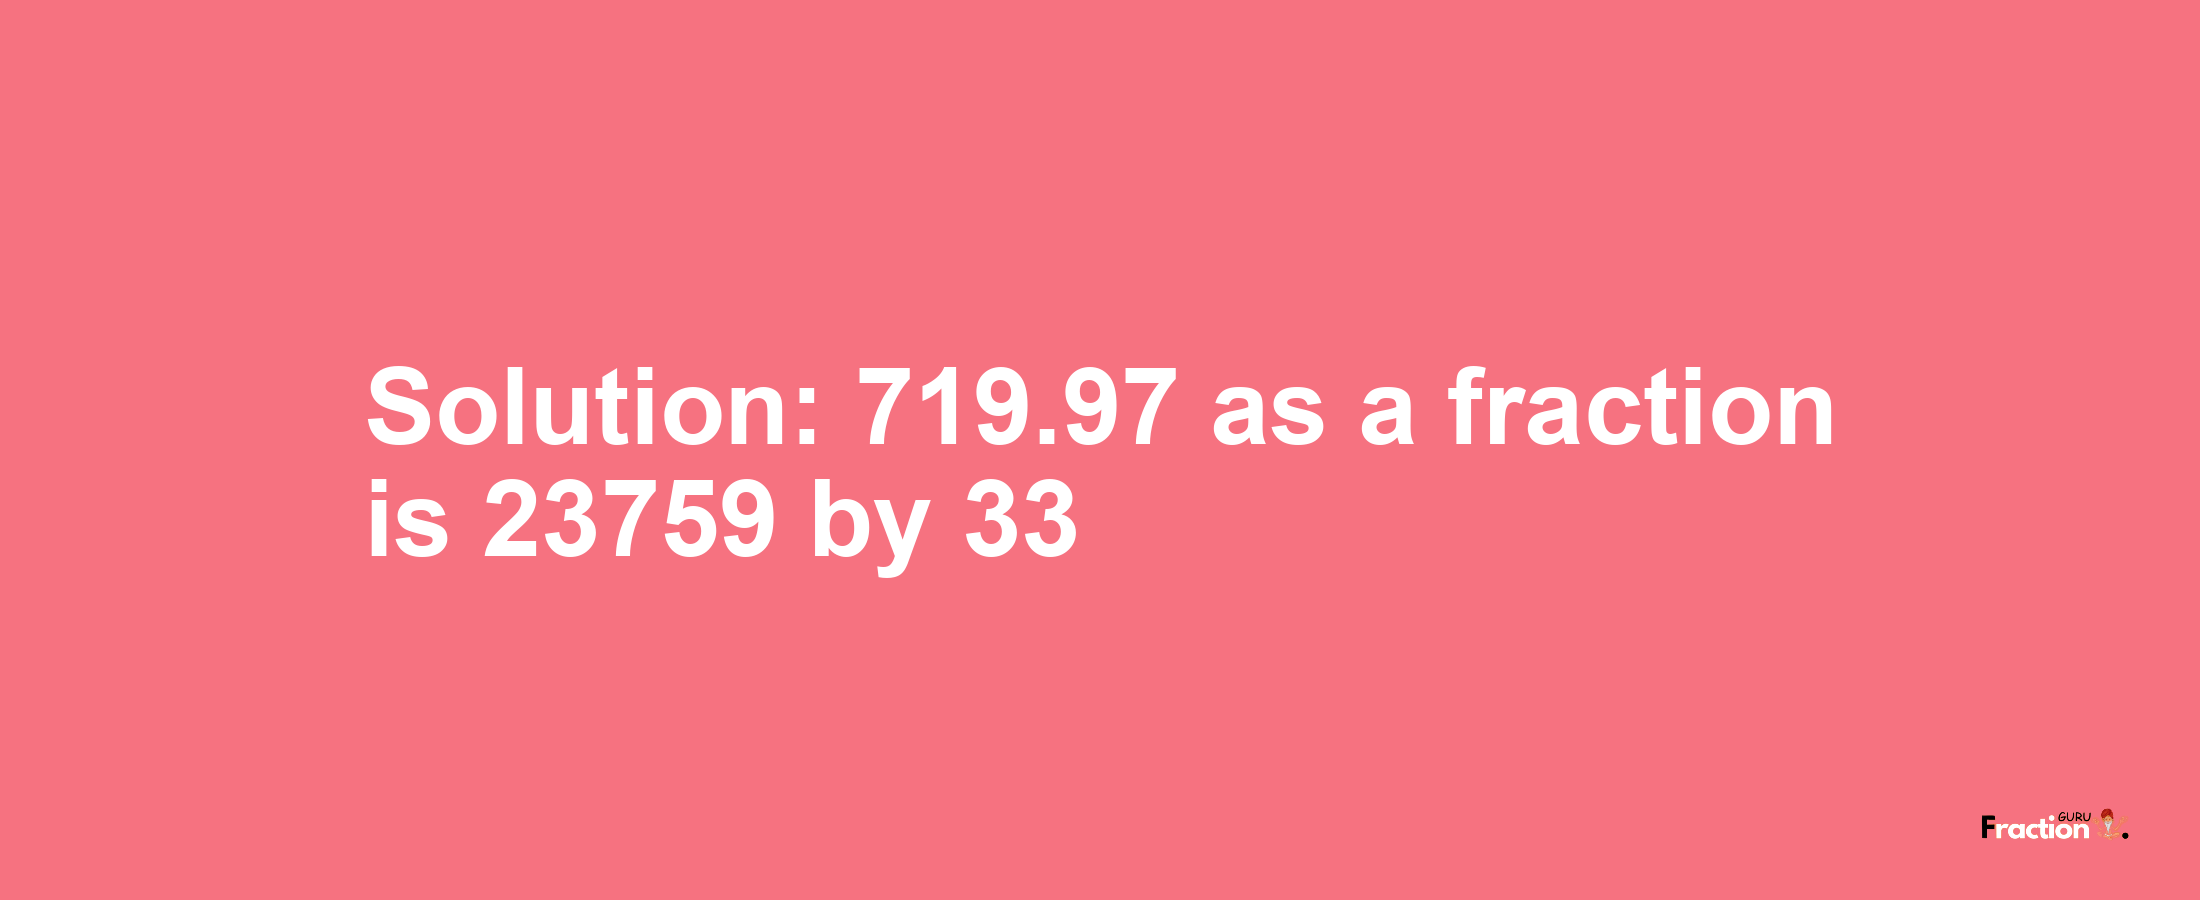 Solution:719.97 as a fraction is 23759/33